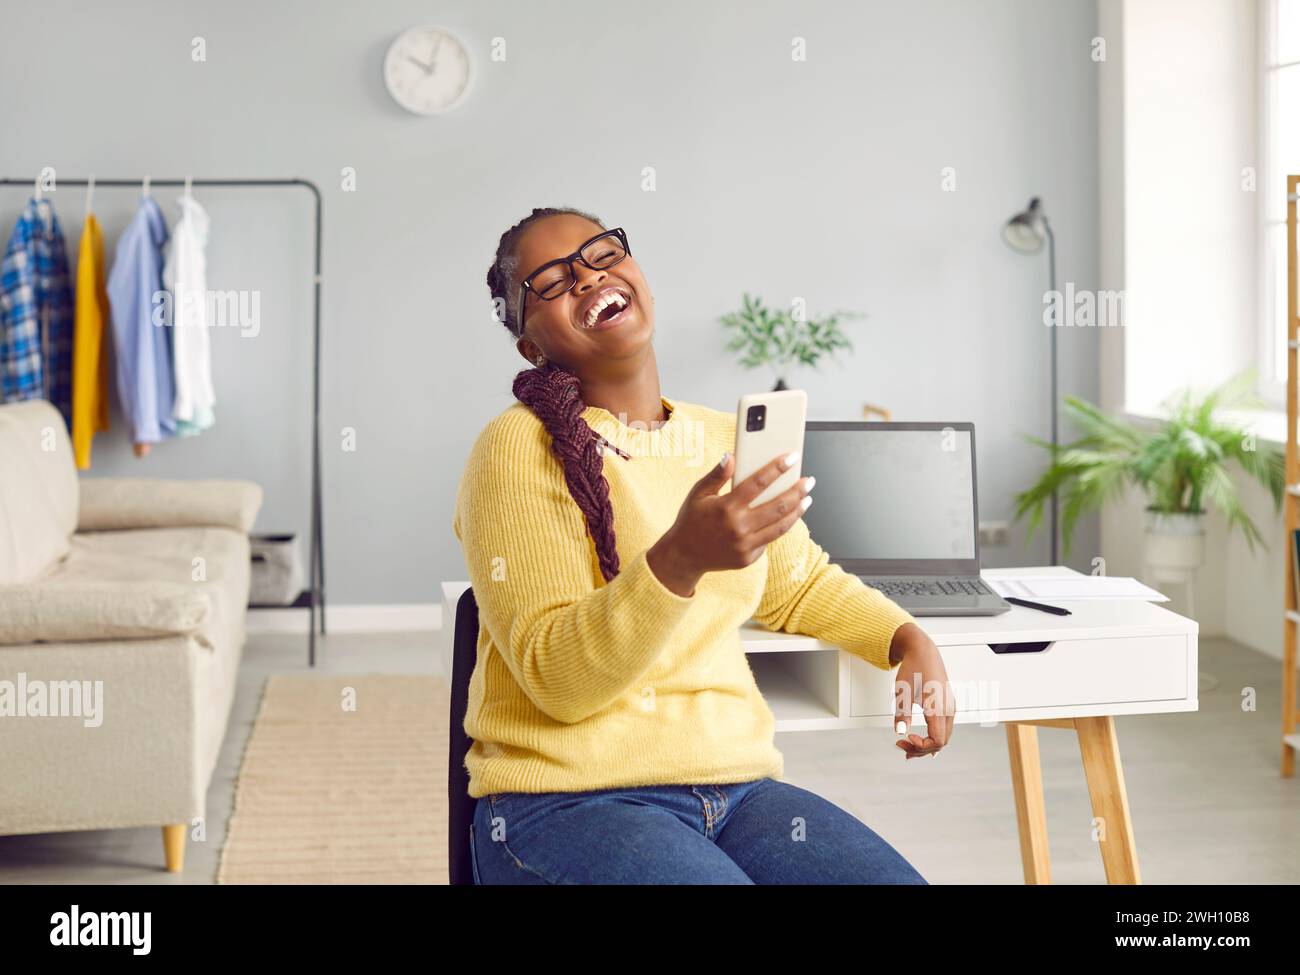 Happy woman working at home, having break, holding phone and laughing at joke on social media Stock Photo